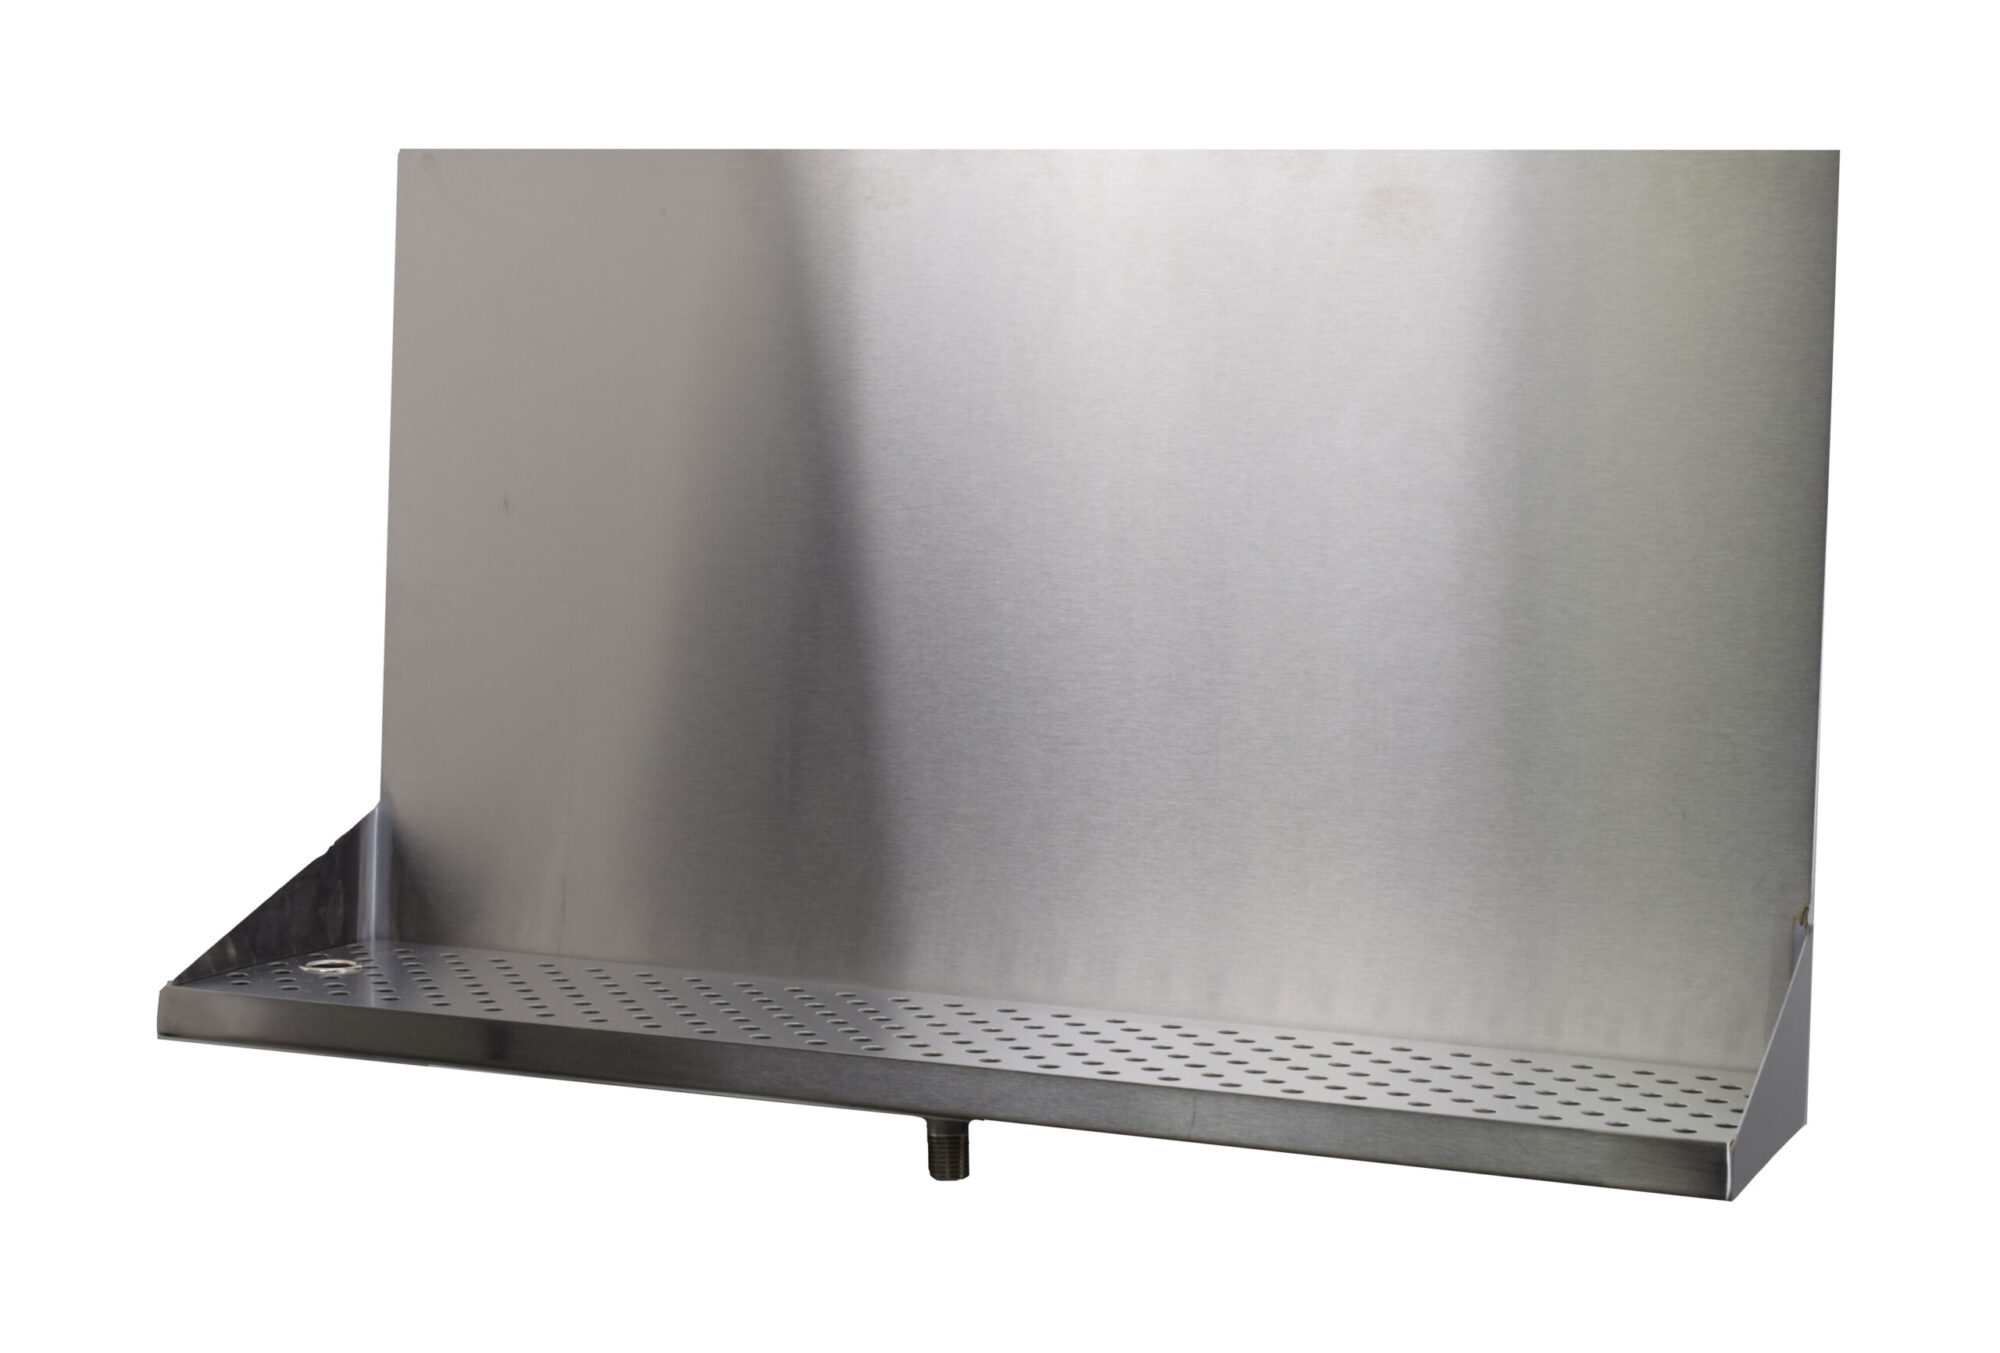 518-240T Stainless Steel Wall Mount Tray with 1/2" NPT Welded Drain - 24"L x 8"W x 18"H - No Holes